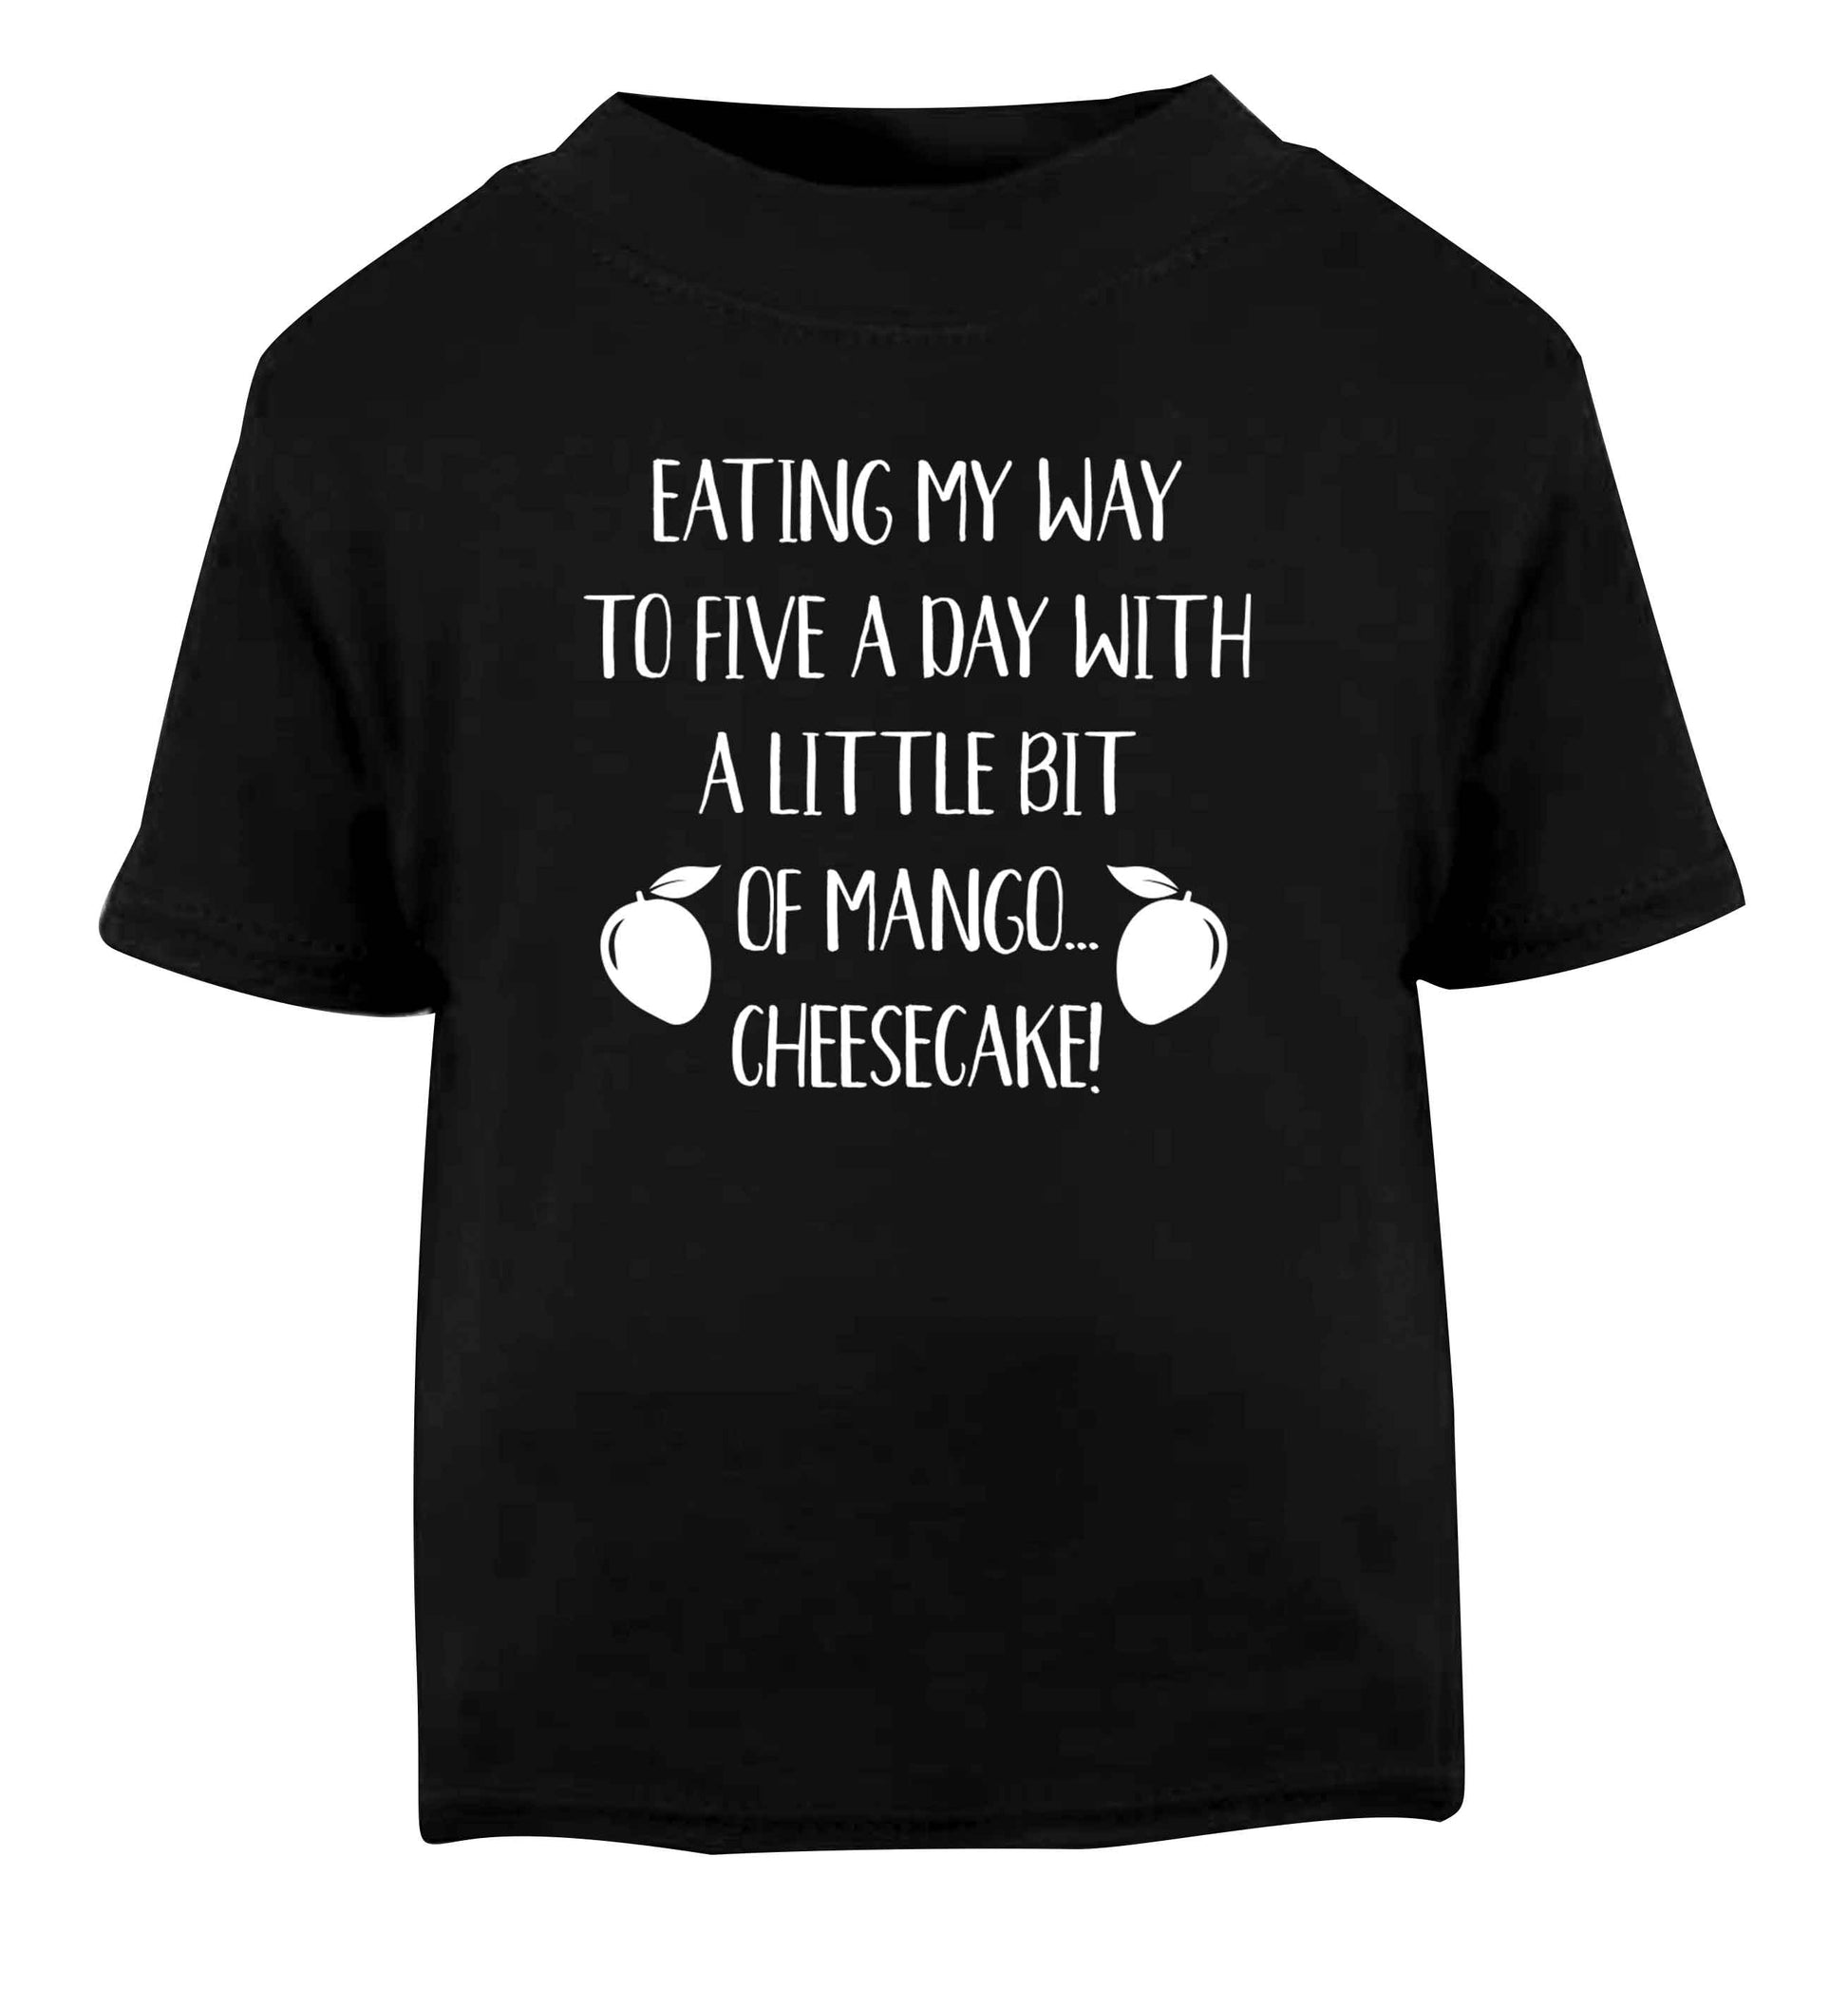 Eating my way to five a day with a little bit of mango cheesecake Black Baby Toddler Tshirt 2 years